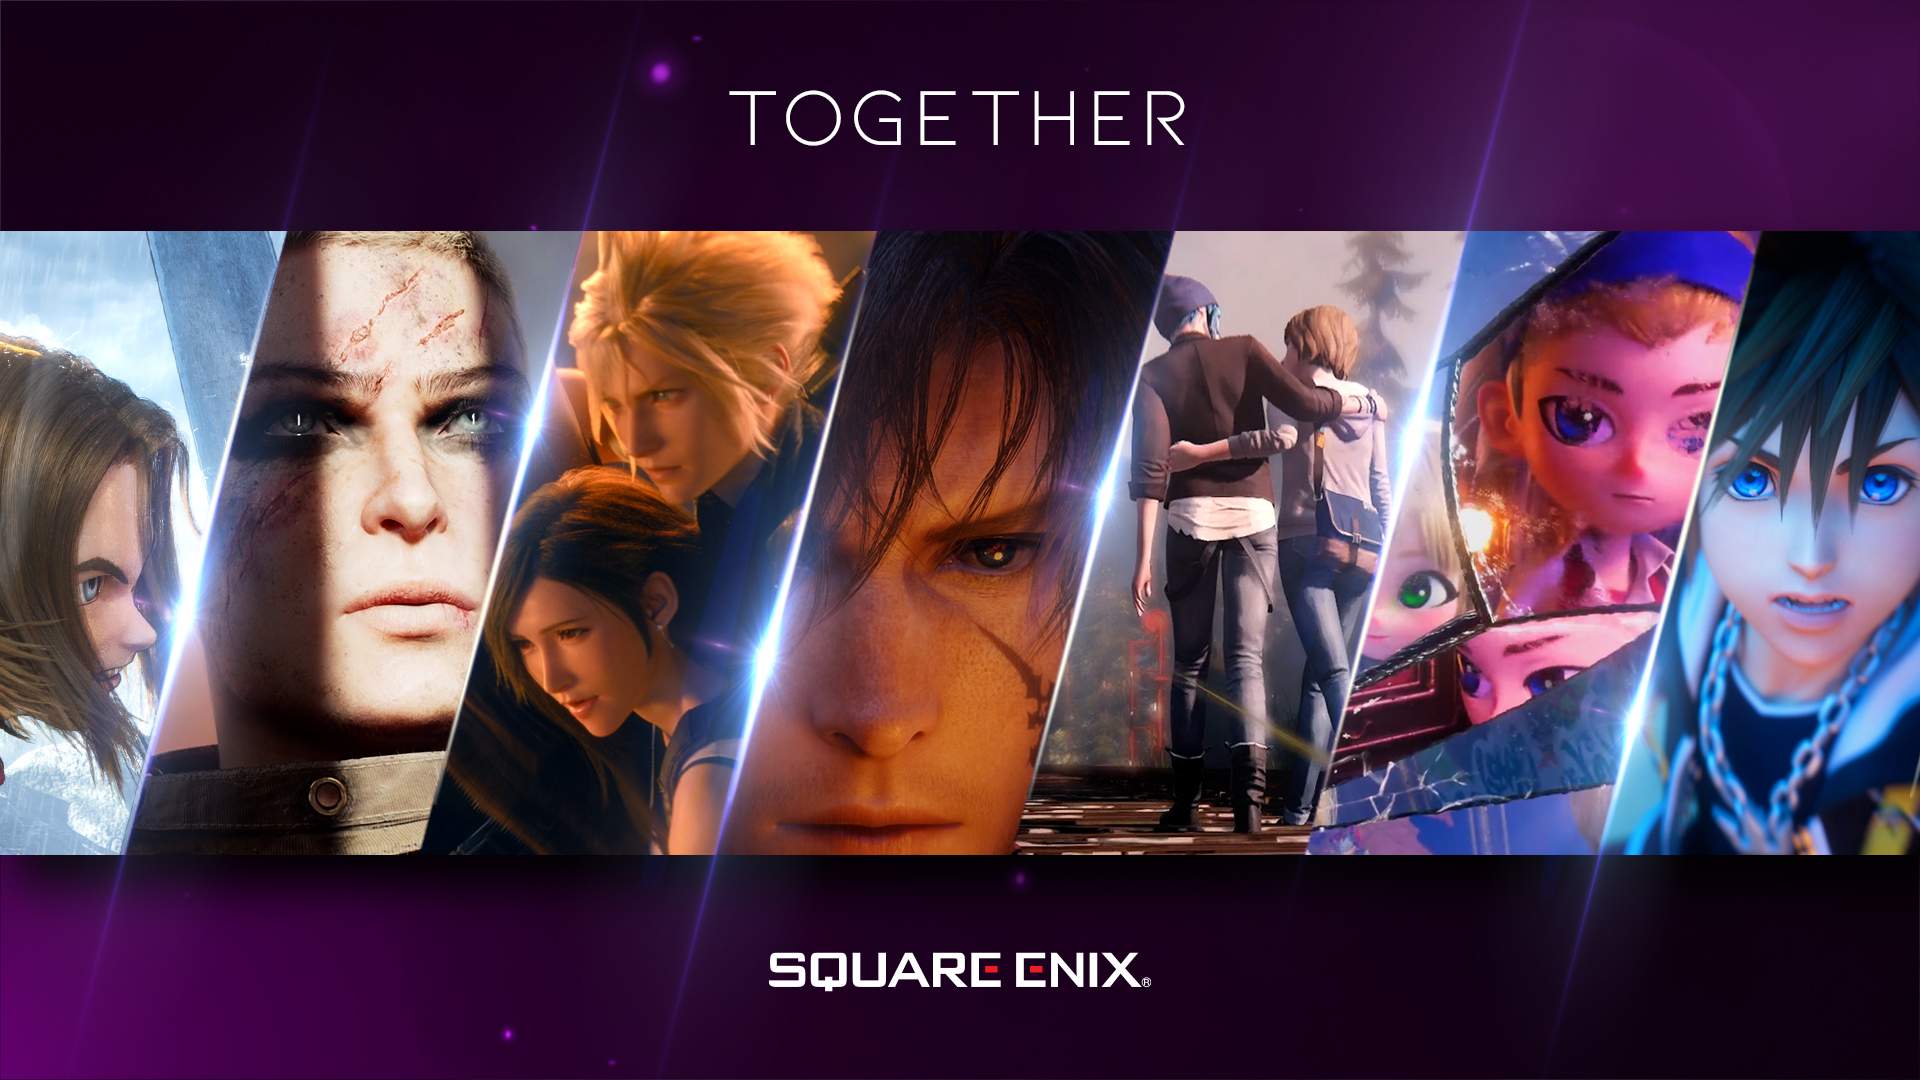 Cozy Square Enix Sale on Humble Store - Save big on Sleeping Dogs, Life is  Strange & more